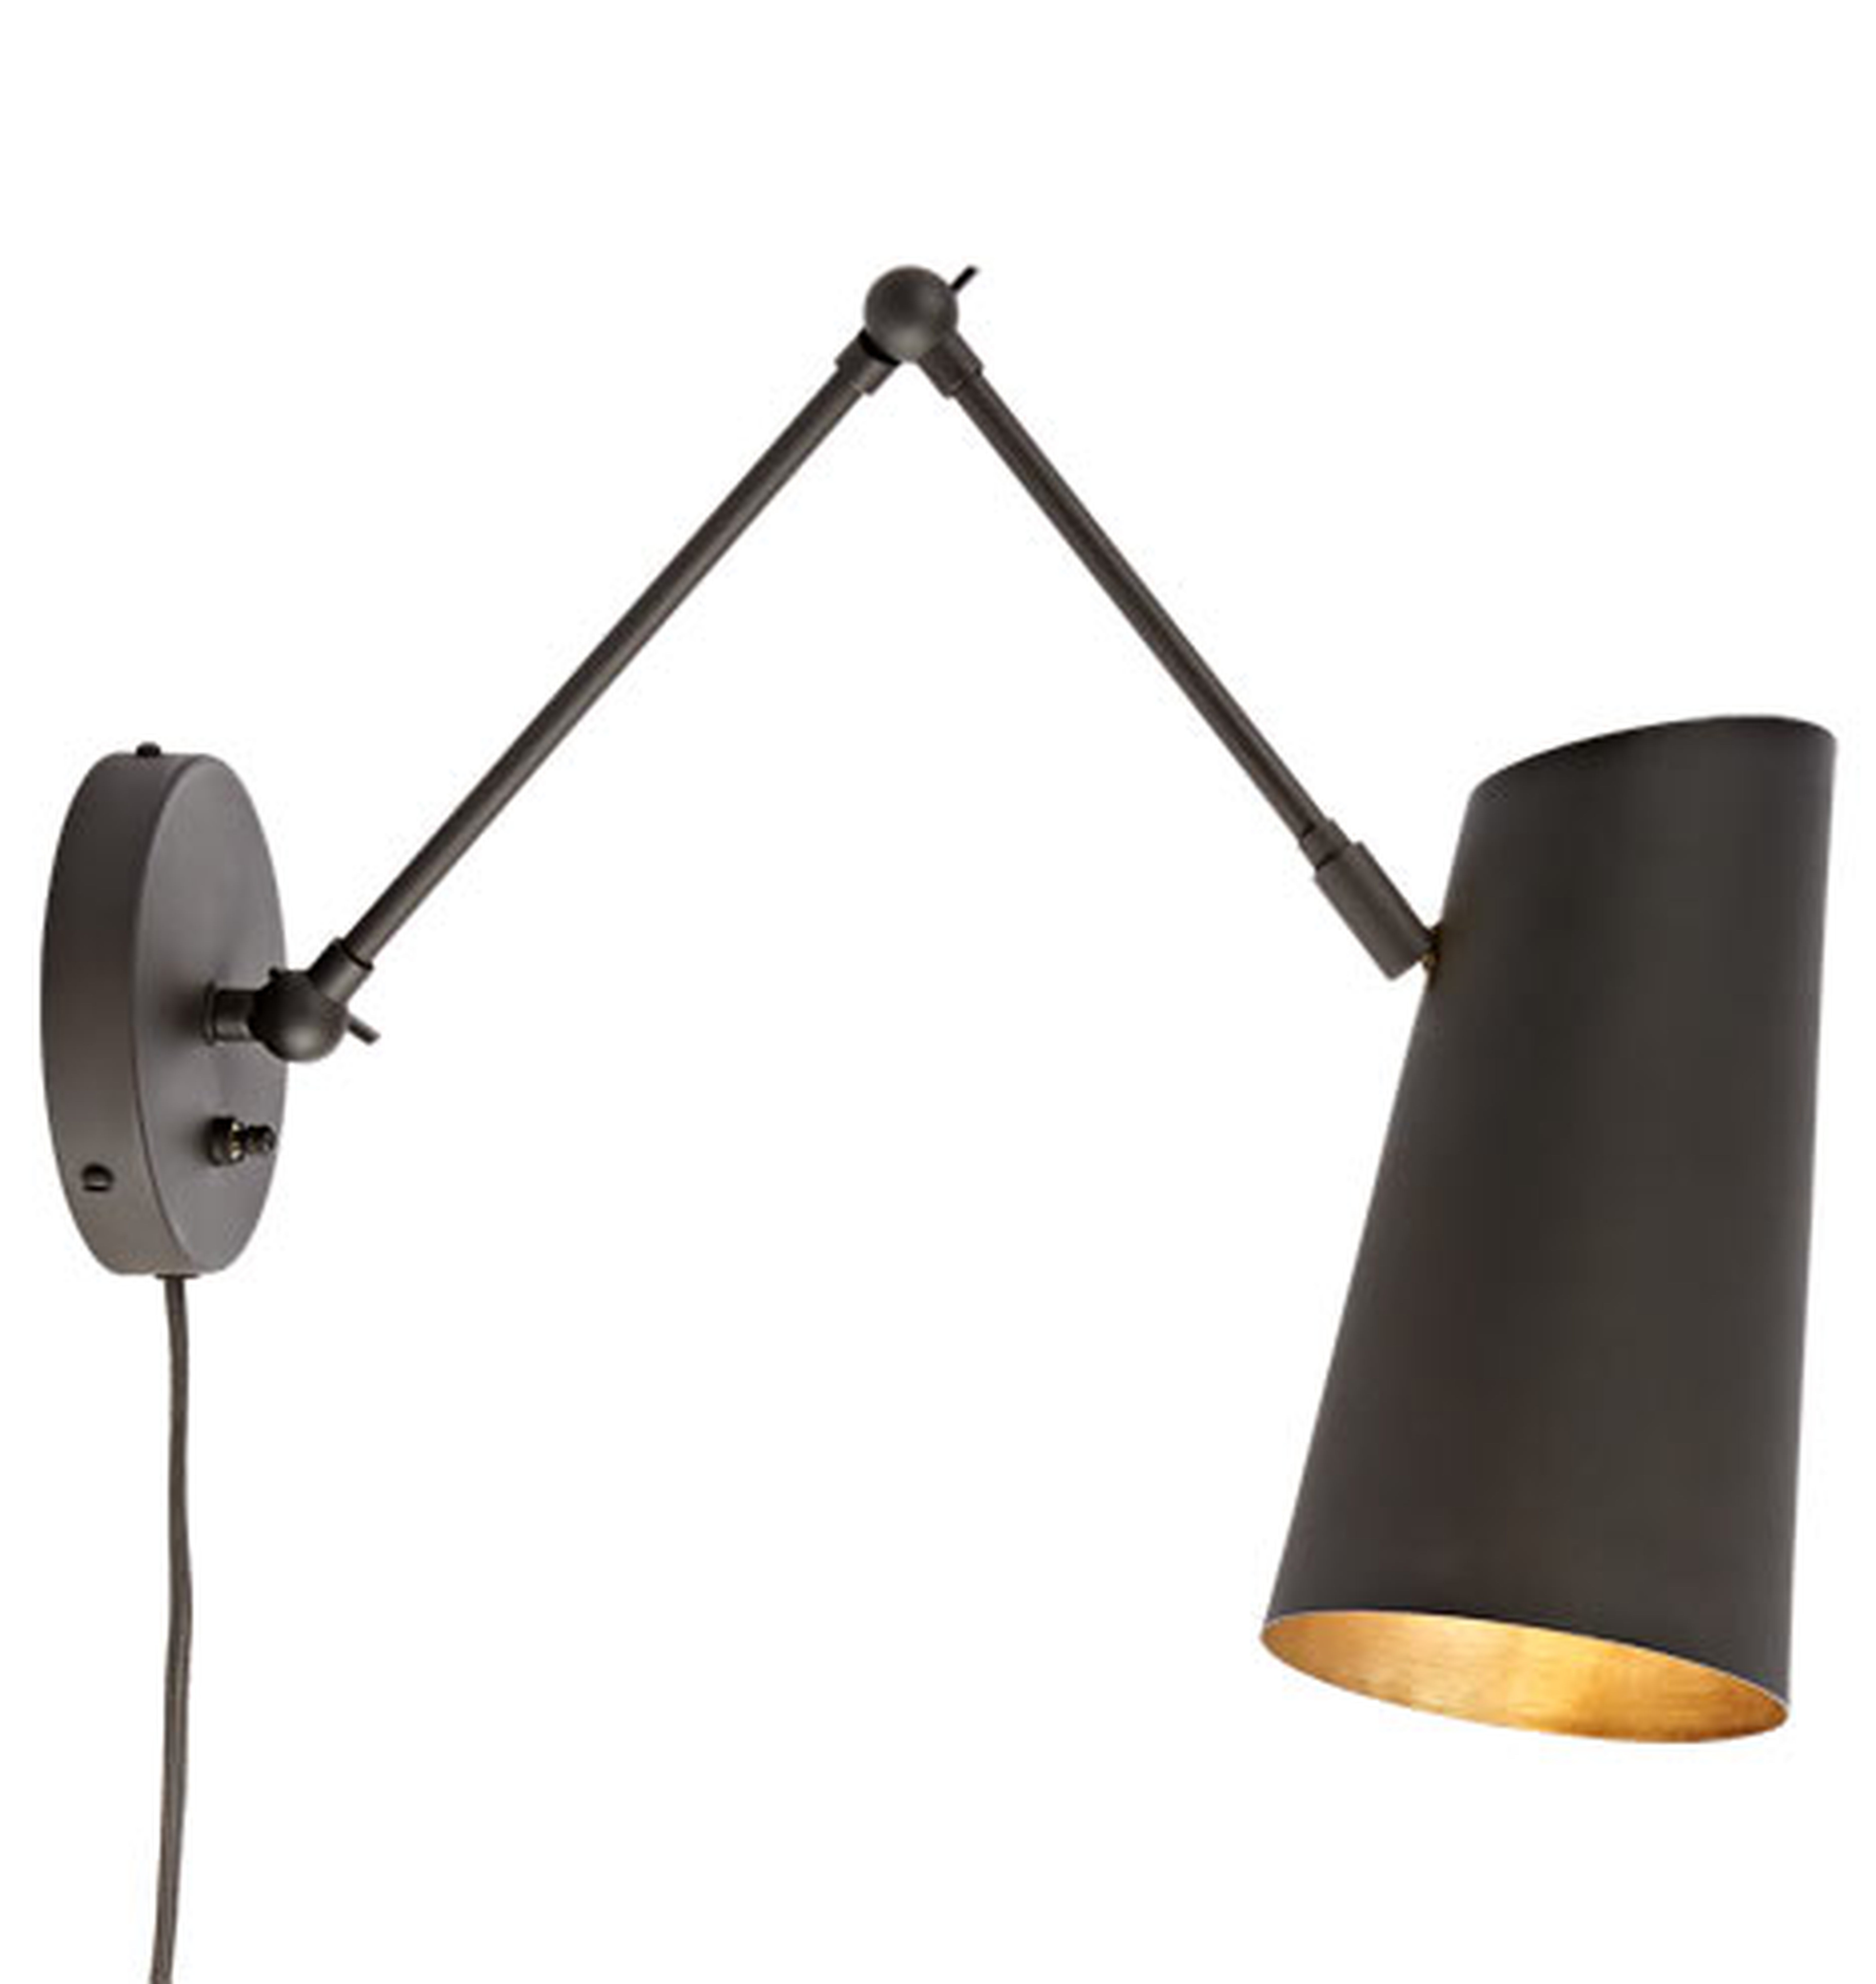 CYPRESS ARTICULATING SCONCE PLUG-IN - OIL-RUBBED BRONZE WITH OIL-RUBBED BRONZE SHADES - Rejuvenation